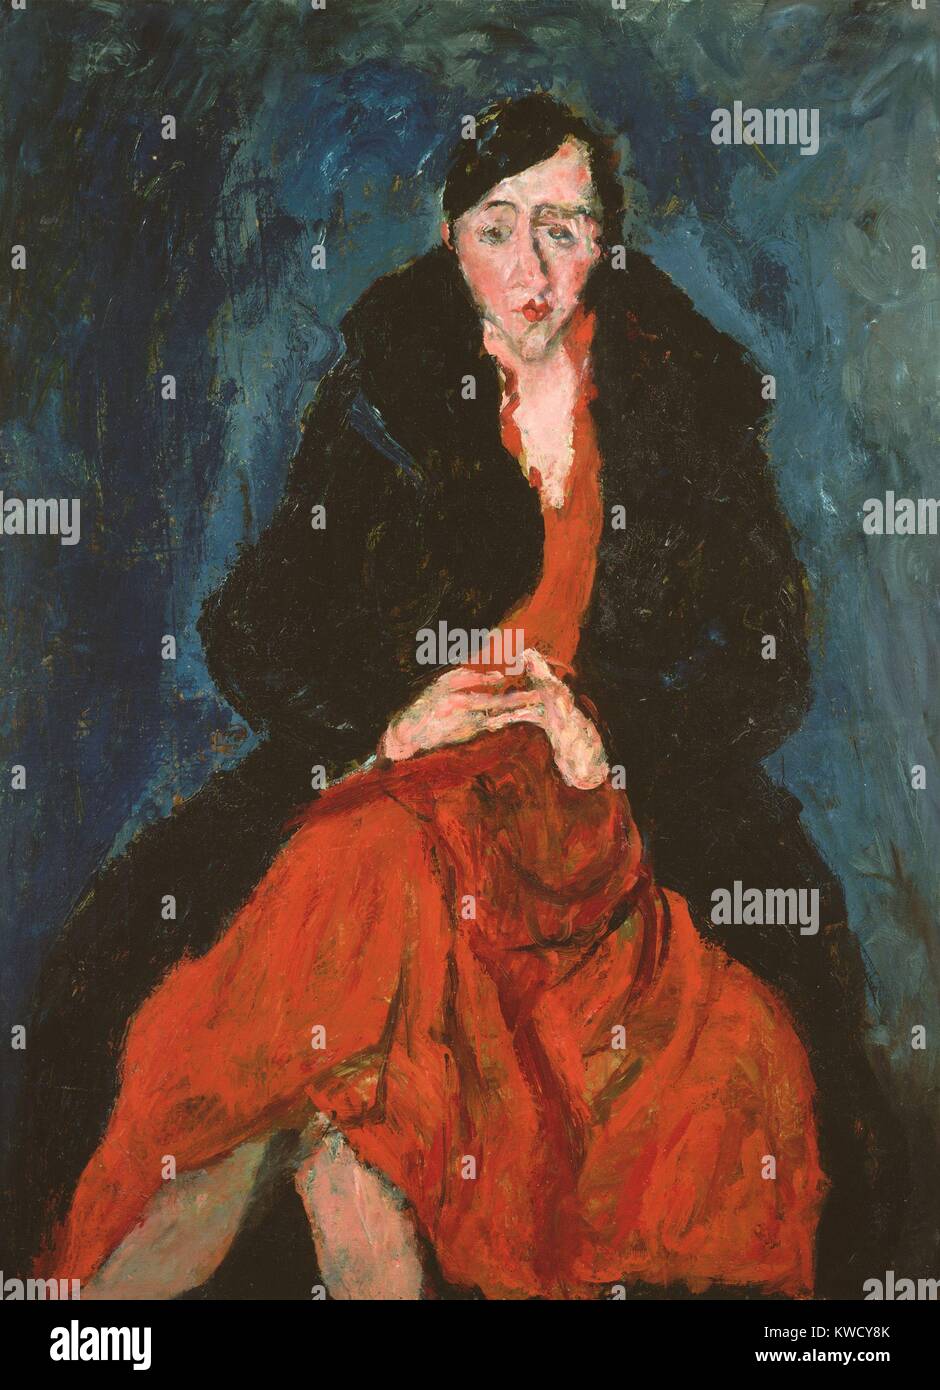 Portrait of Madeleine Castaing, by Chaim Soutine, 1929, Russian French Expressionist oil painting. Madeleine Castaing and her husband were his patrons when he painted this canvas (BSLOC 2017 5 150) Stock Photo